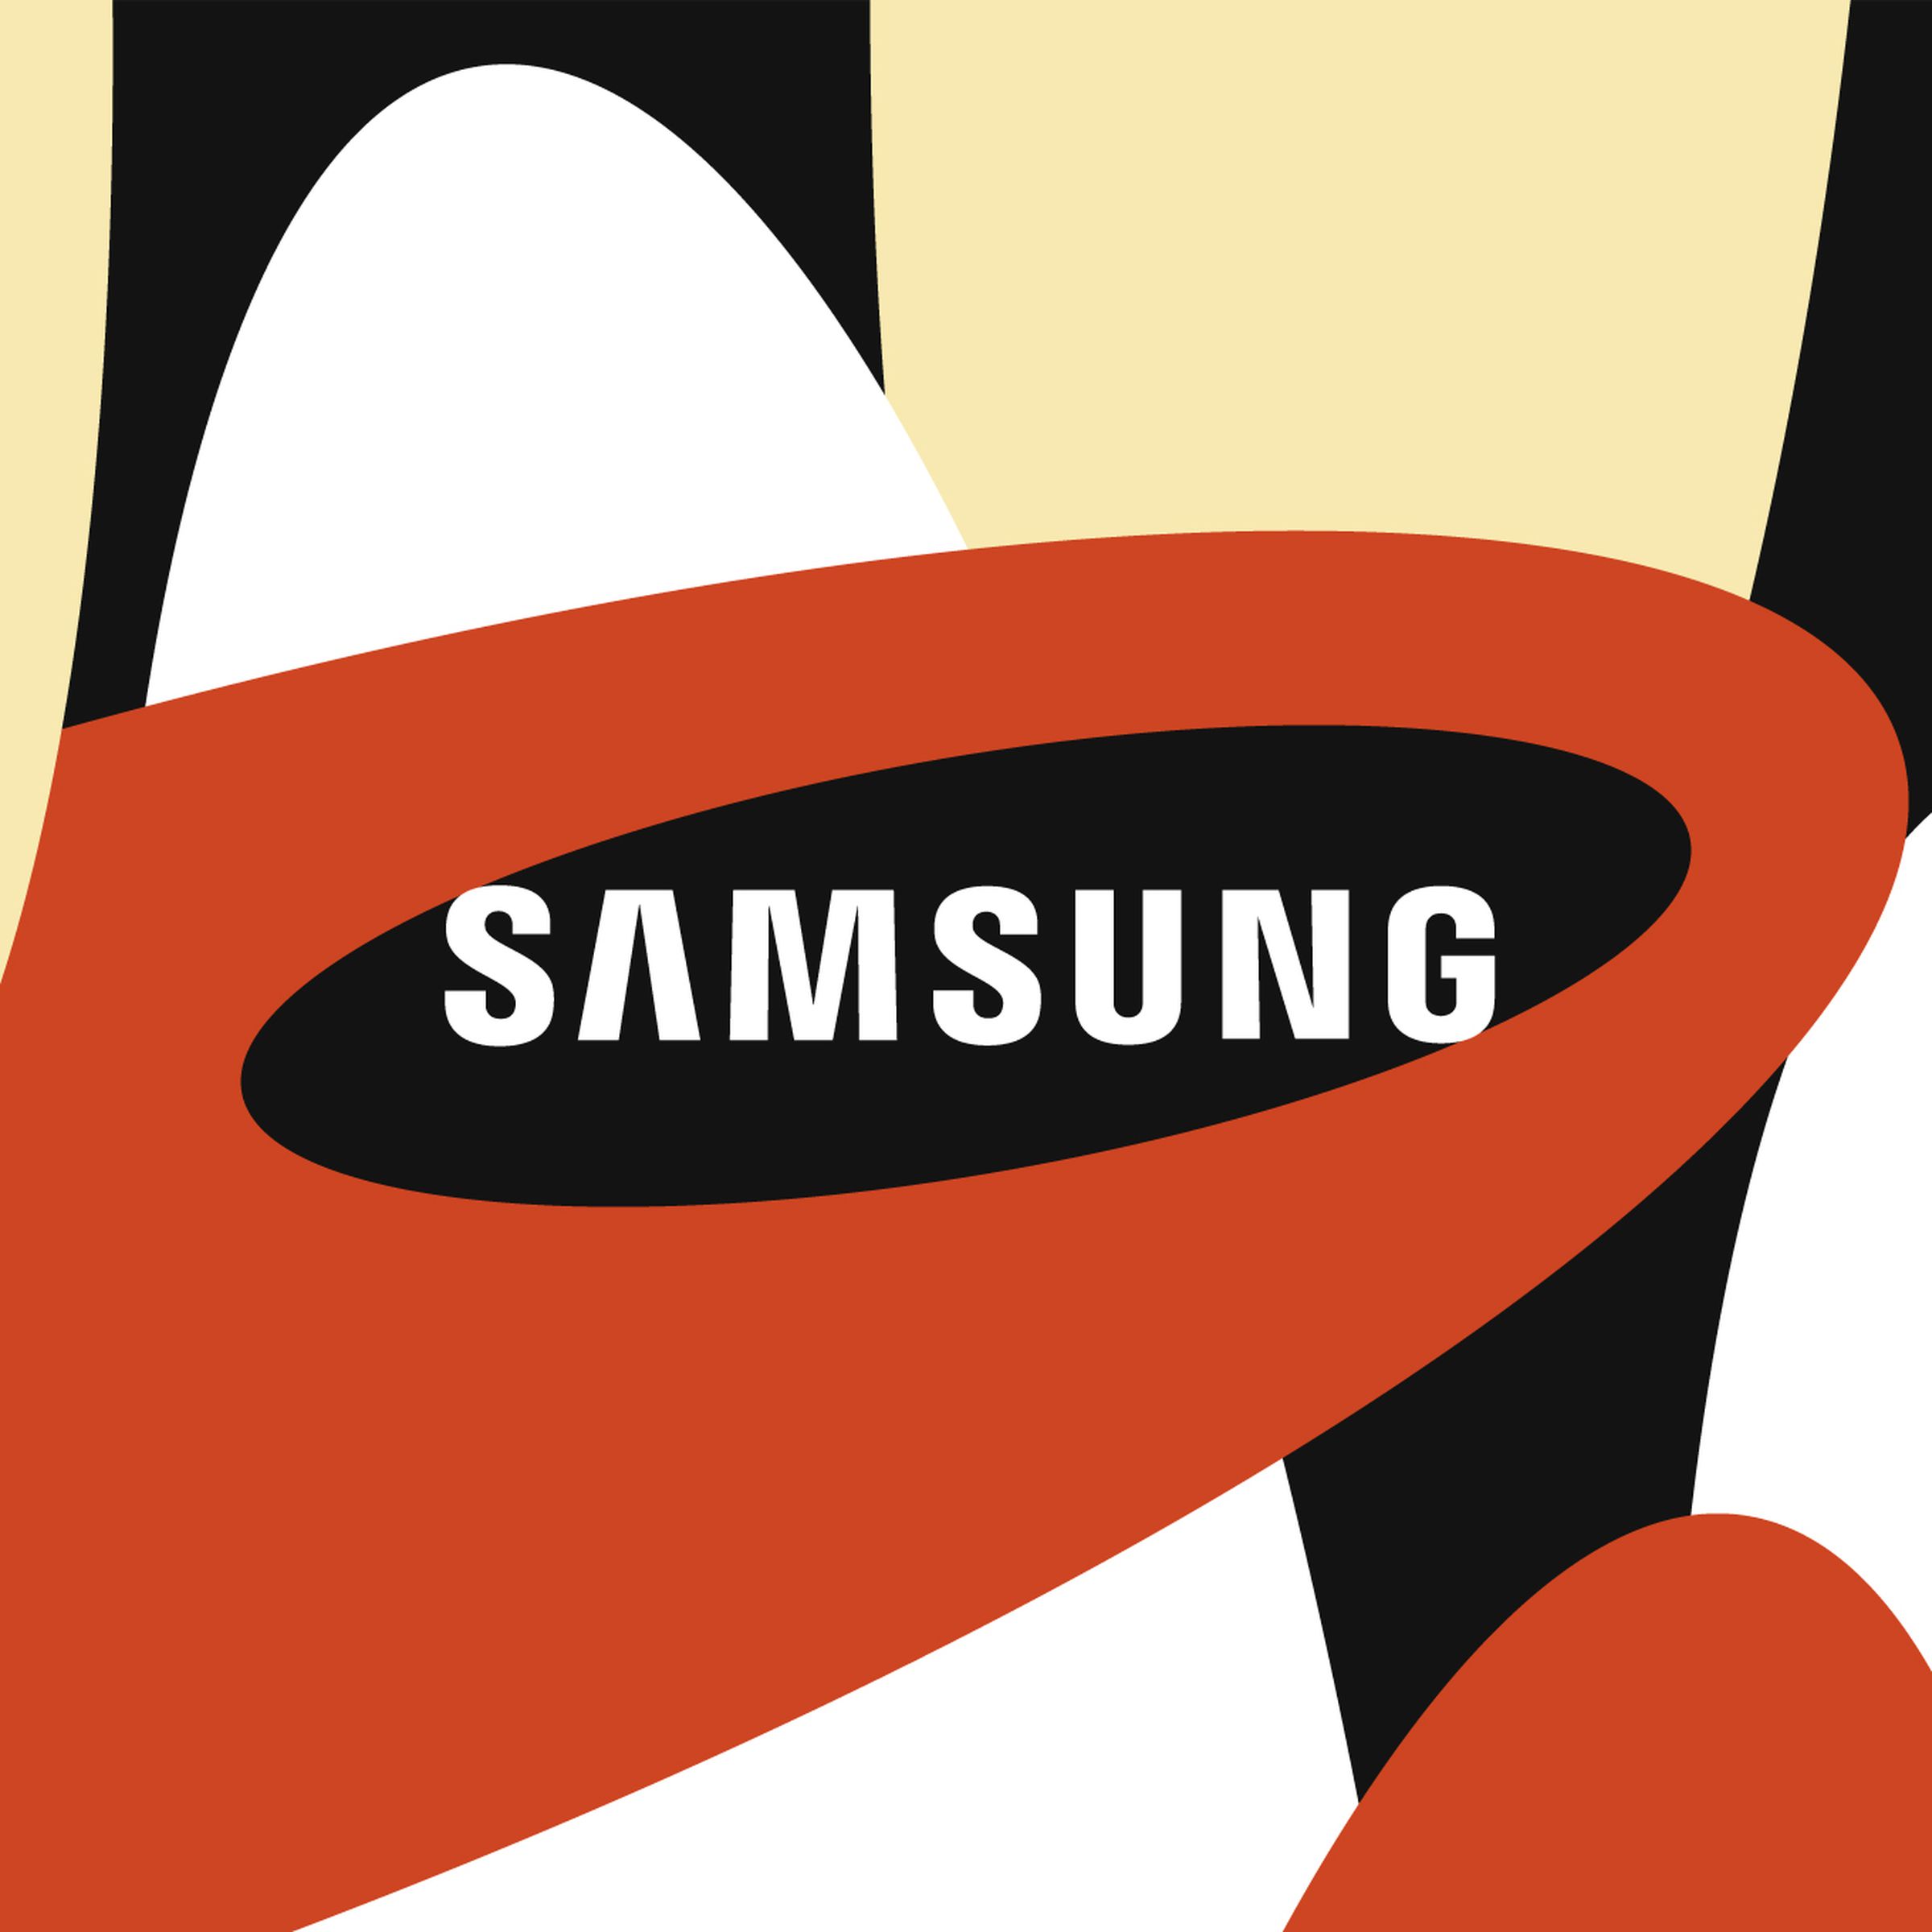 Samsung’s logo set in the middle of red, black, white, and yellow ovals.